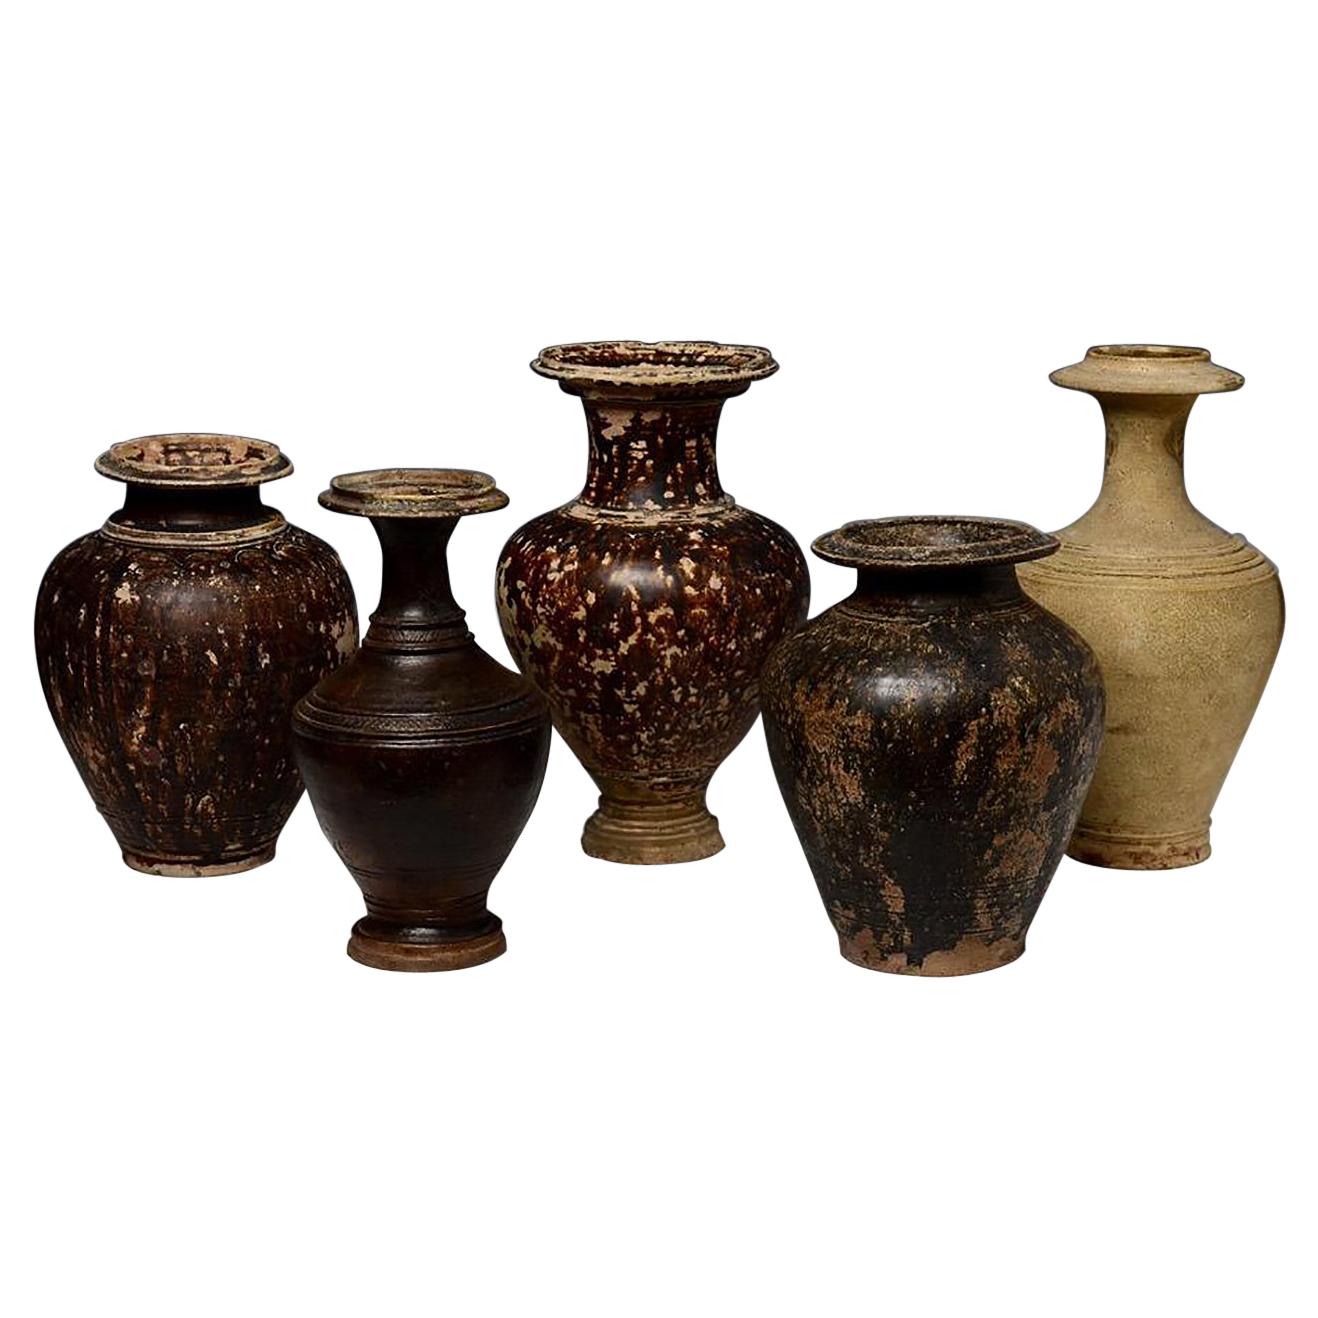 11th-13th Century, Kulen to Bayon, Antique Khmer Pottery Vases